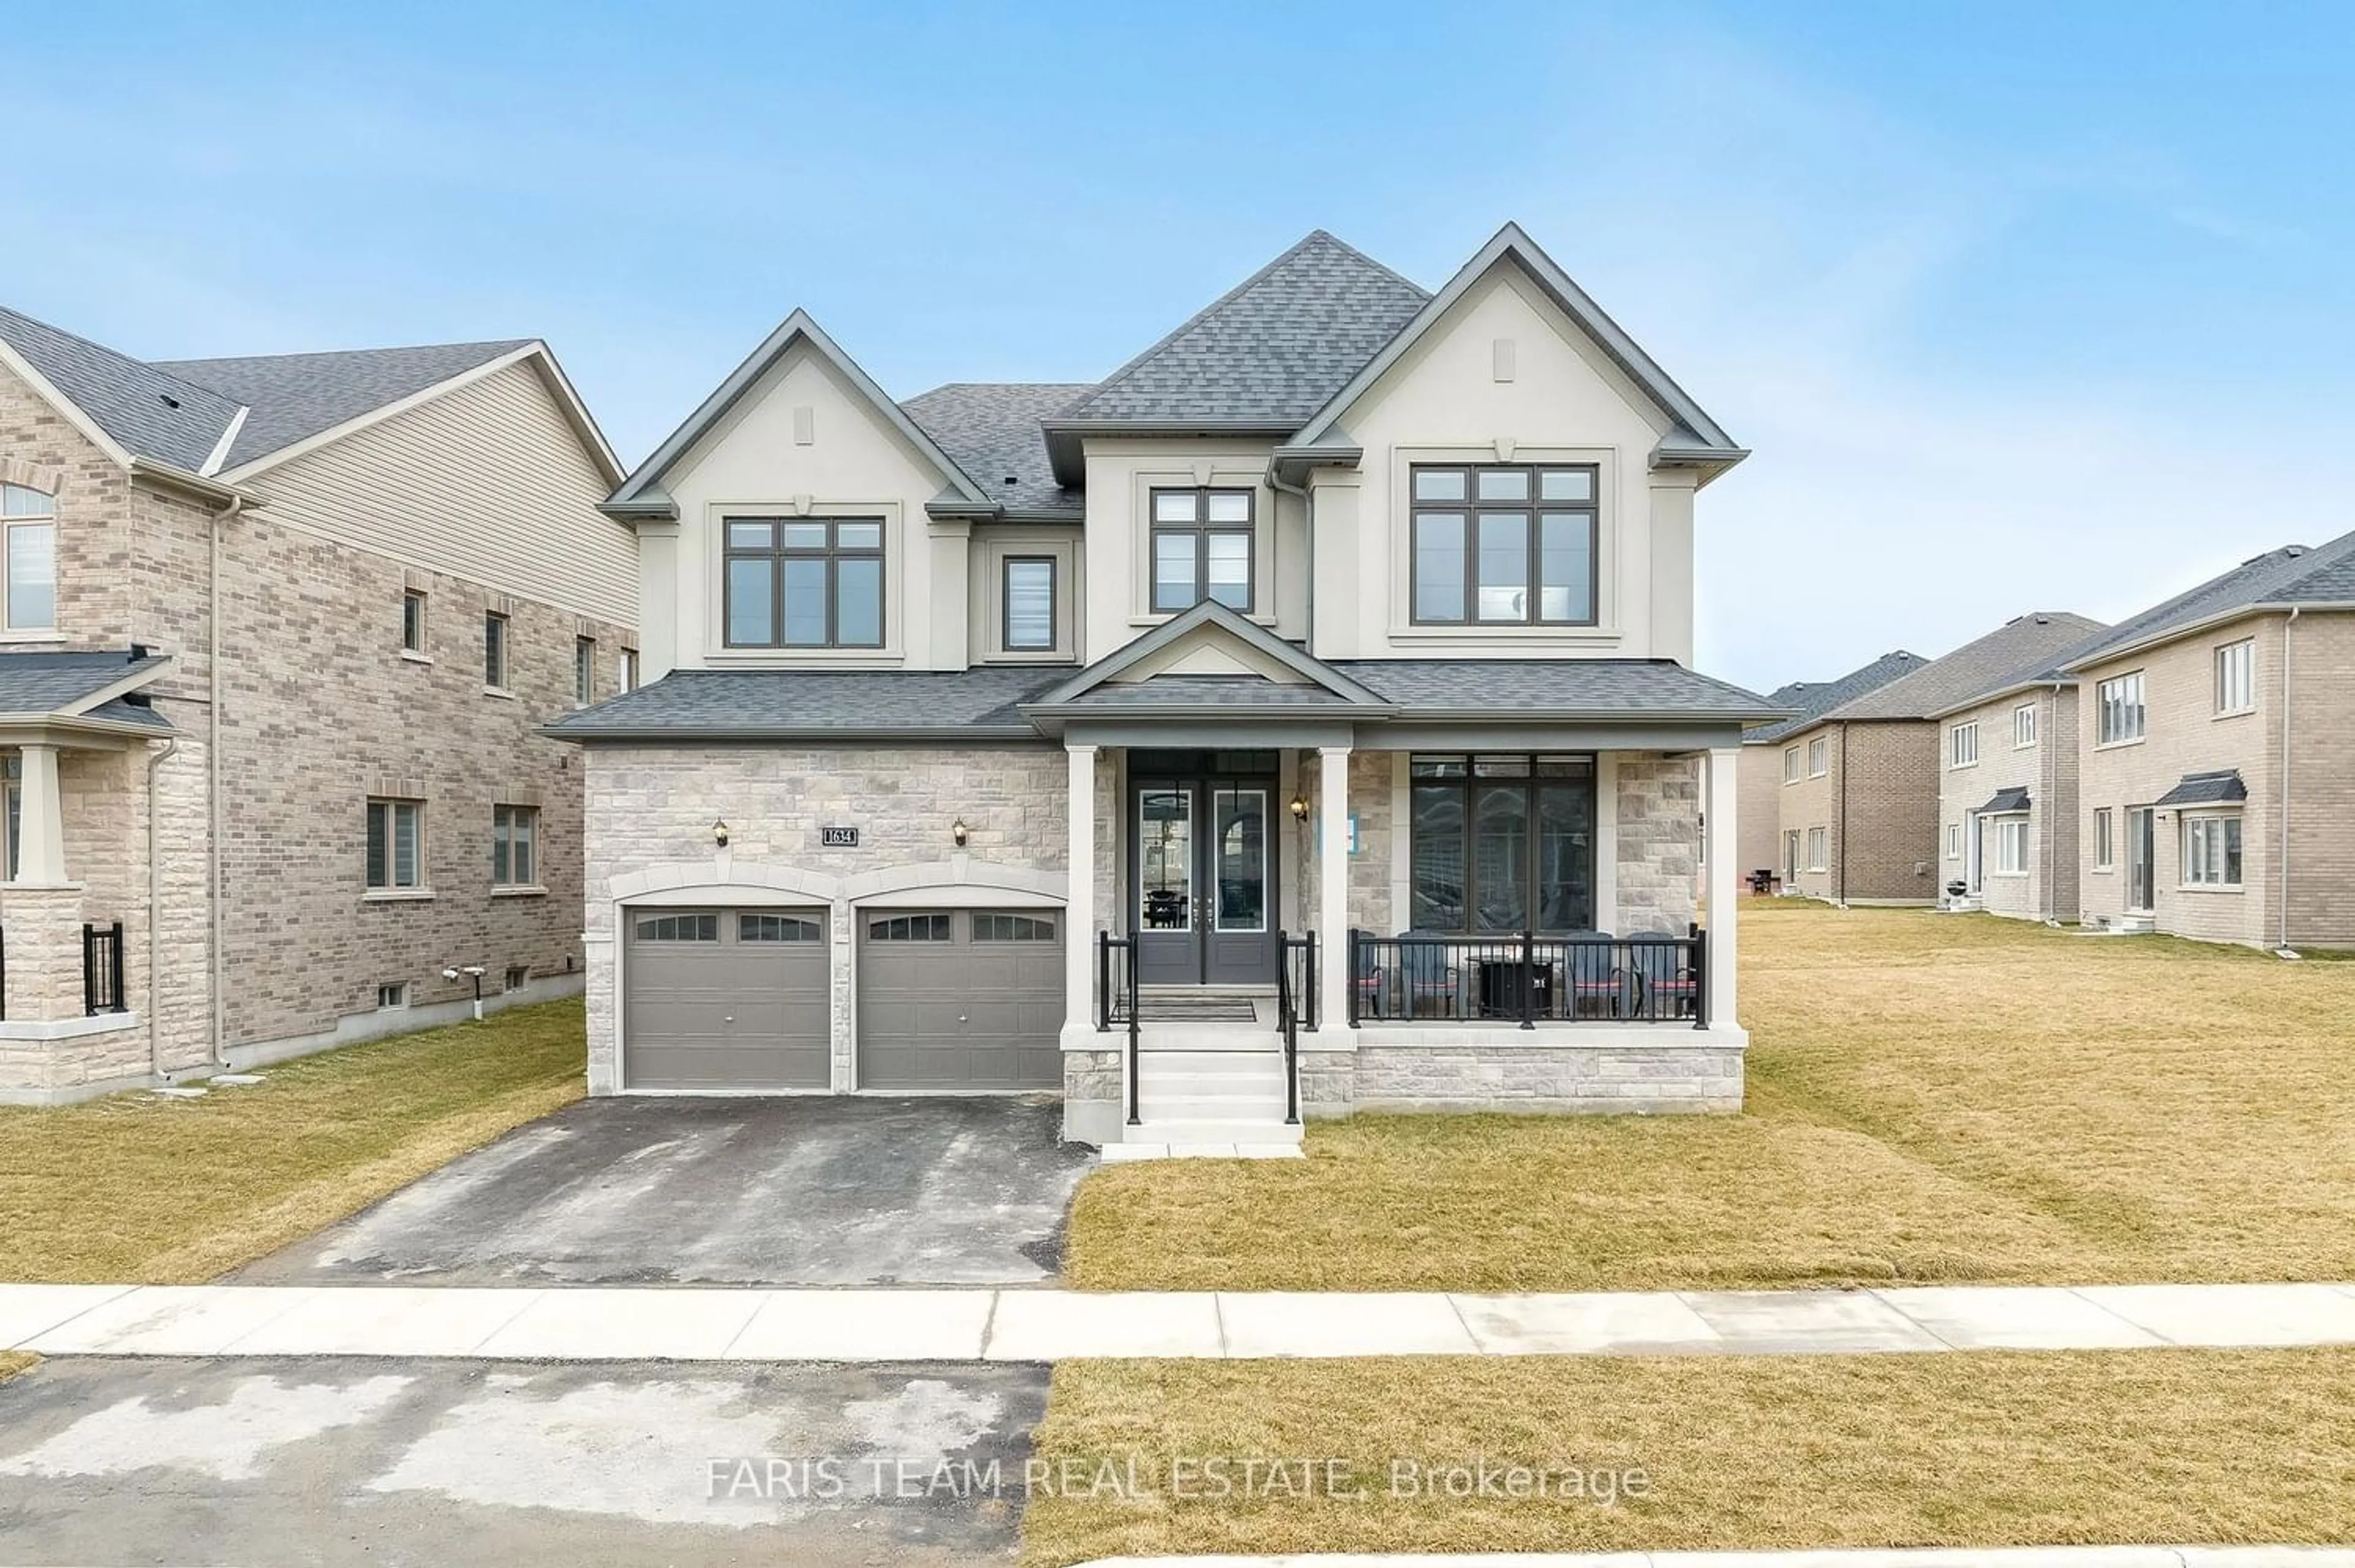 Home with stone exterior material for 1634 Luno Way, Innisfil Ontario L9S 0P9